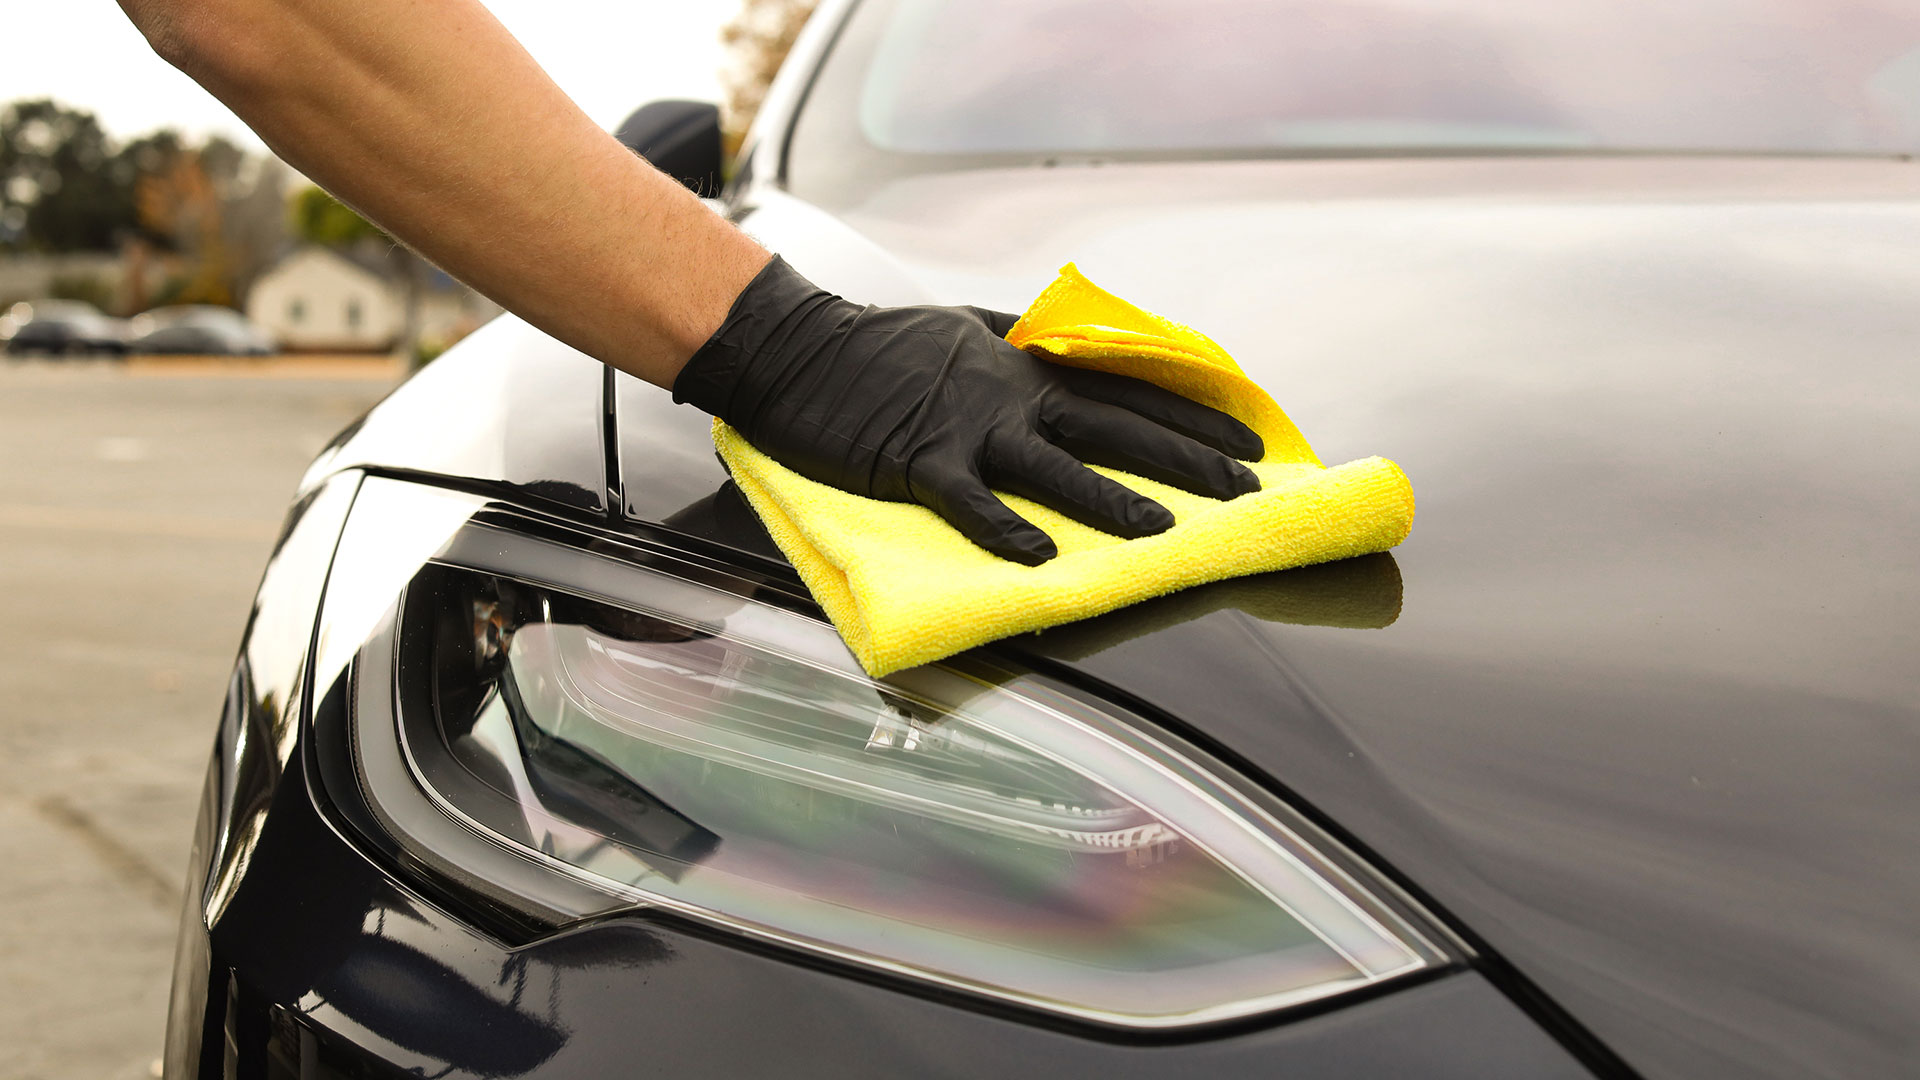 The Best Car Detailing Tools